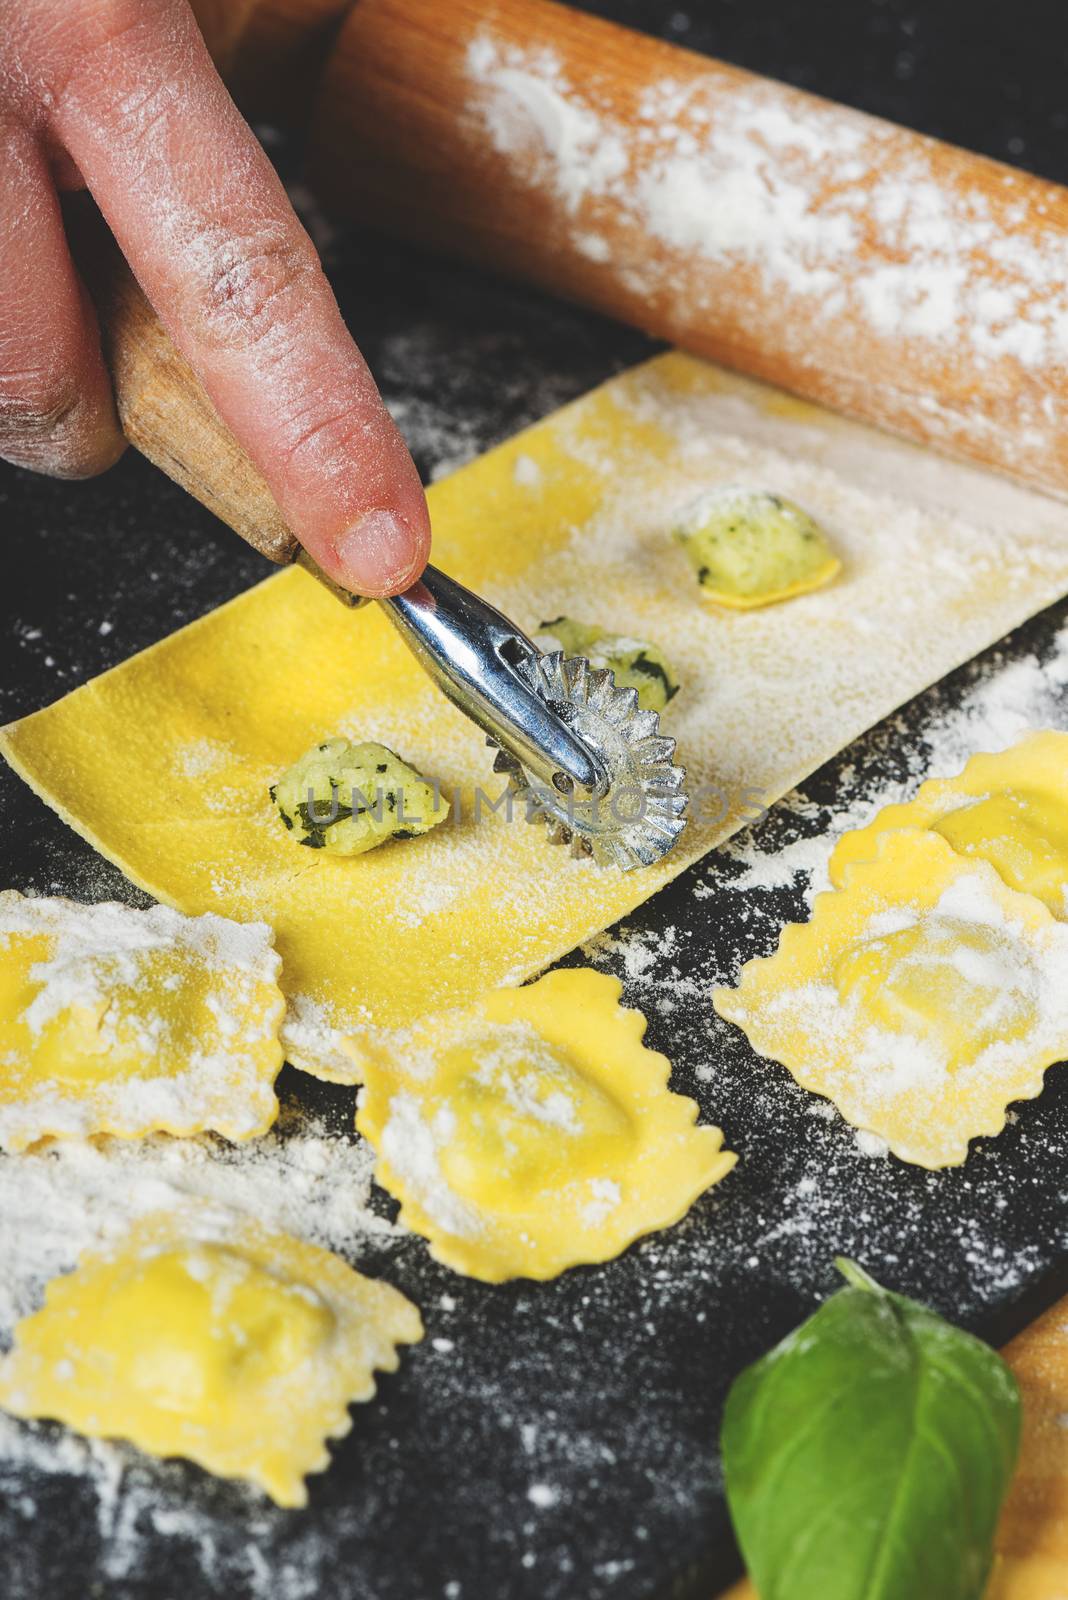 Preparing ravioli in the kitchen with tools and ingredients. by verbano